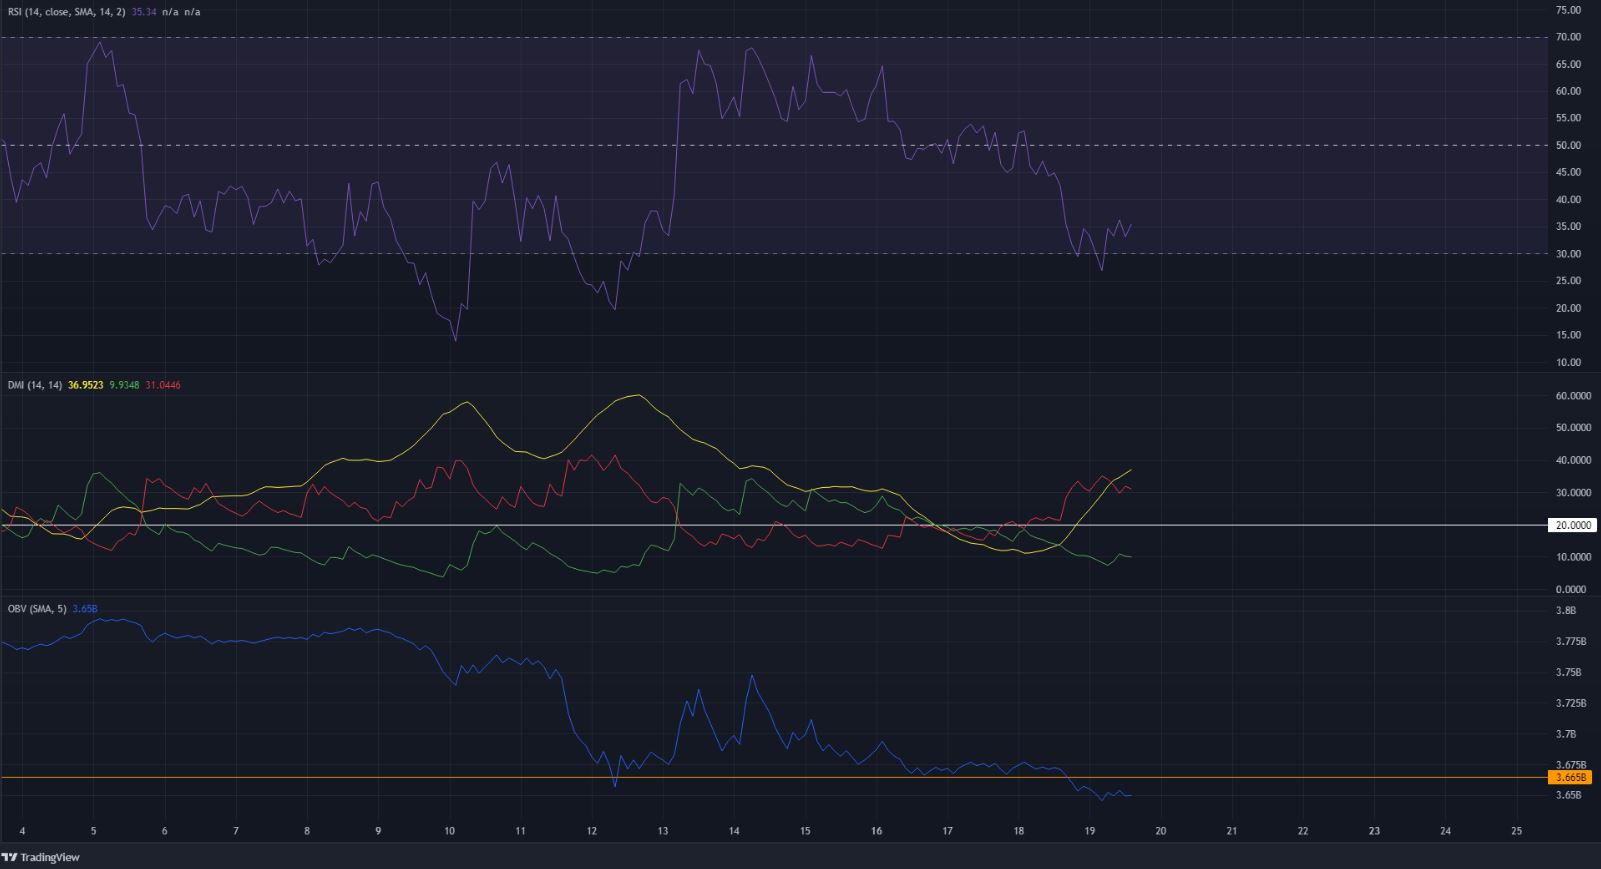 Decentraland unable to climb past resistance, but bulls haven't given up yet